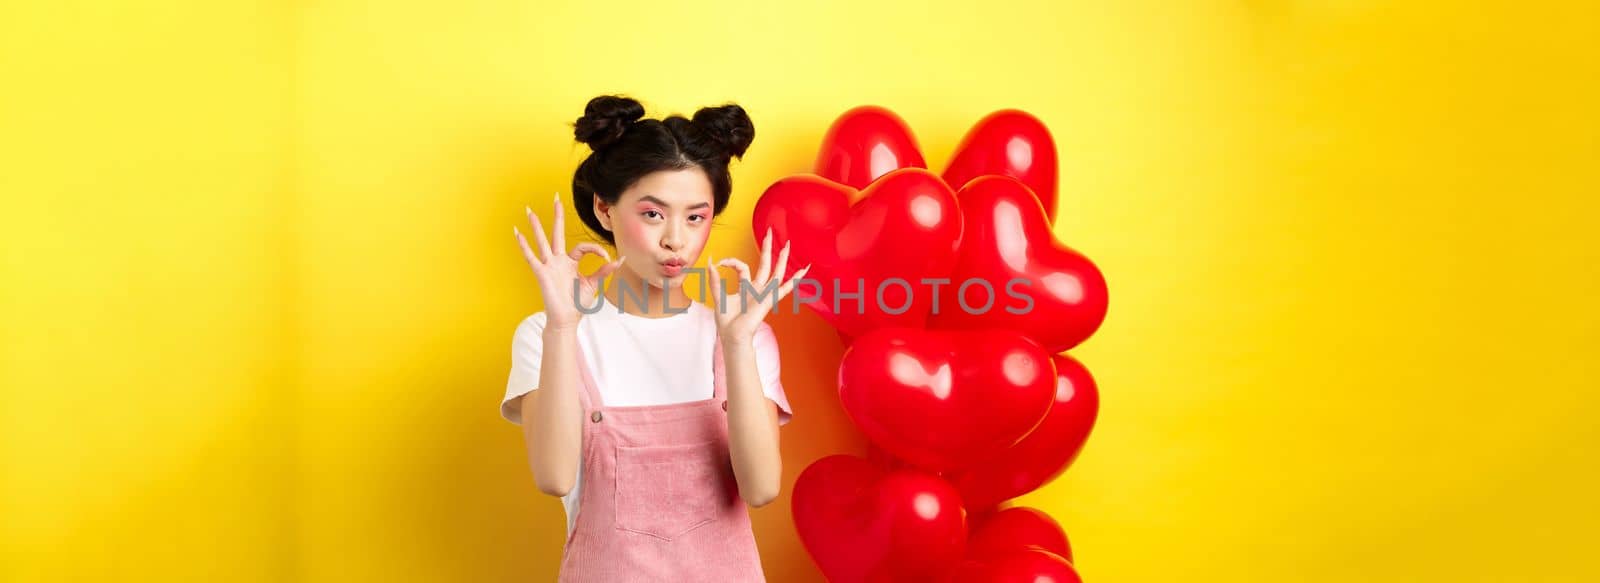 Cute young asian woman in stylish clothes and makeup, showing okay signs near st Valentines day heart balloons, praise good offer, standing on yellow background.